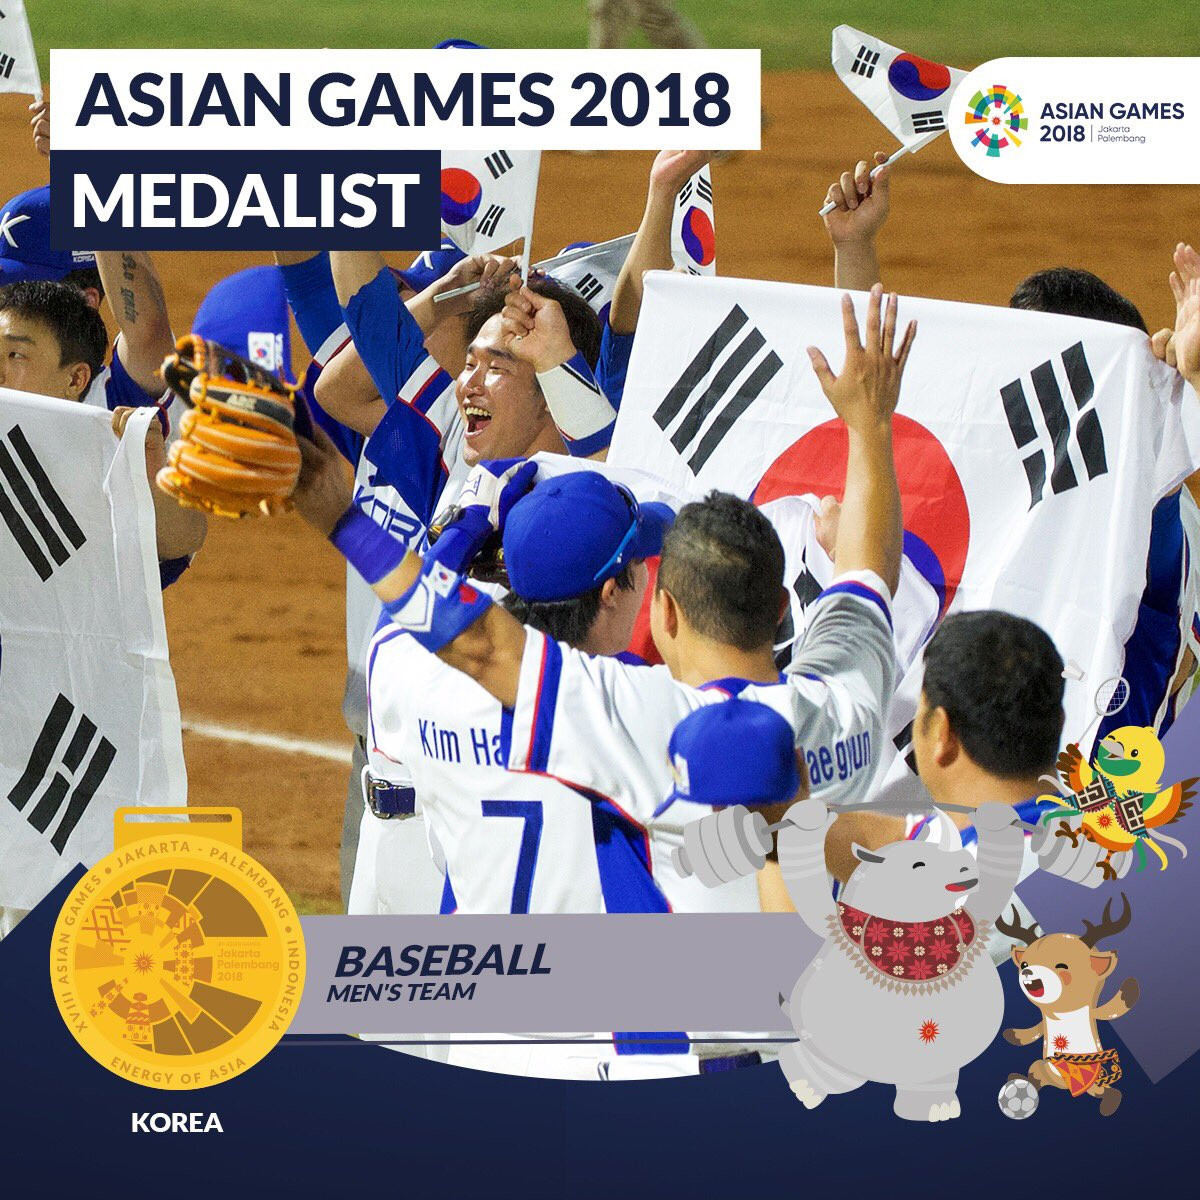 South Korea celebrate winning the baseball gold medal at the 2018 Asian Games in Jakarta-Palembang, their third consecutive victory in the event ©Jakarta-Palembang 2018